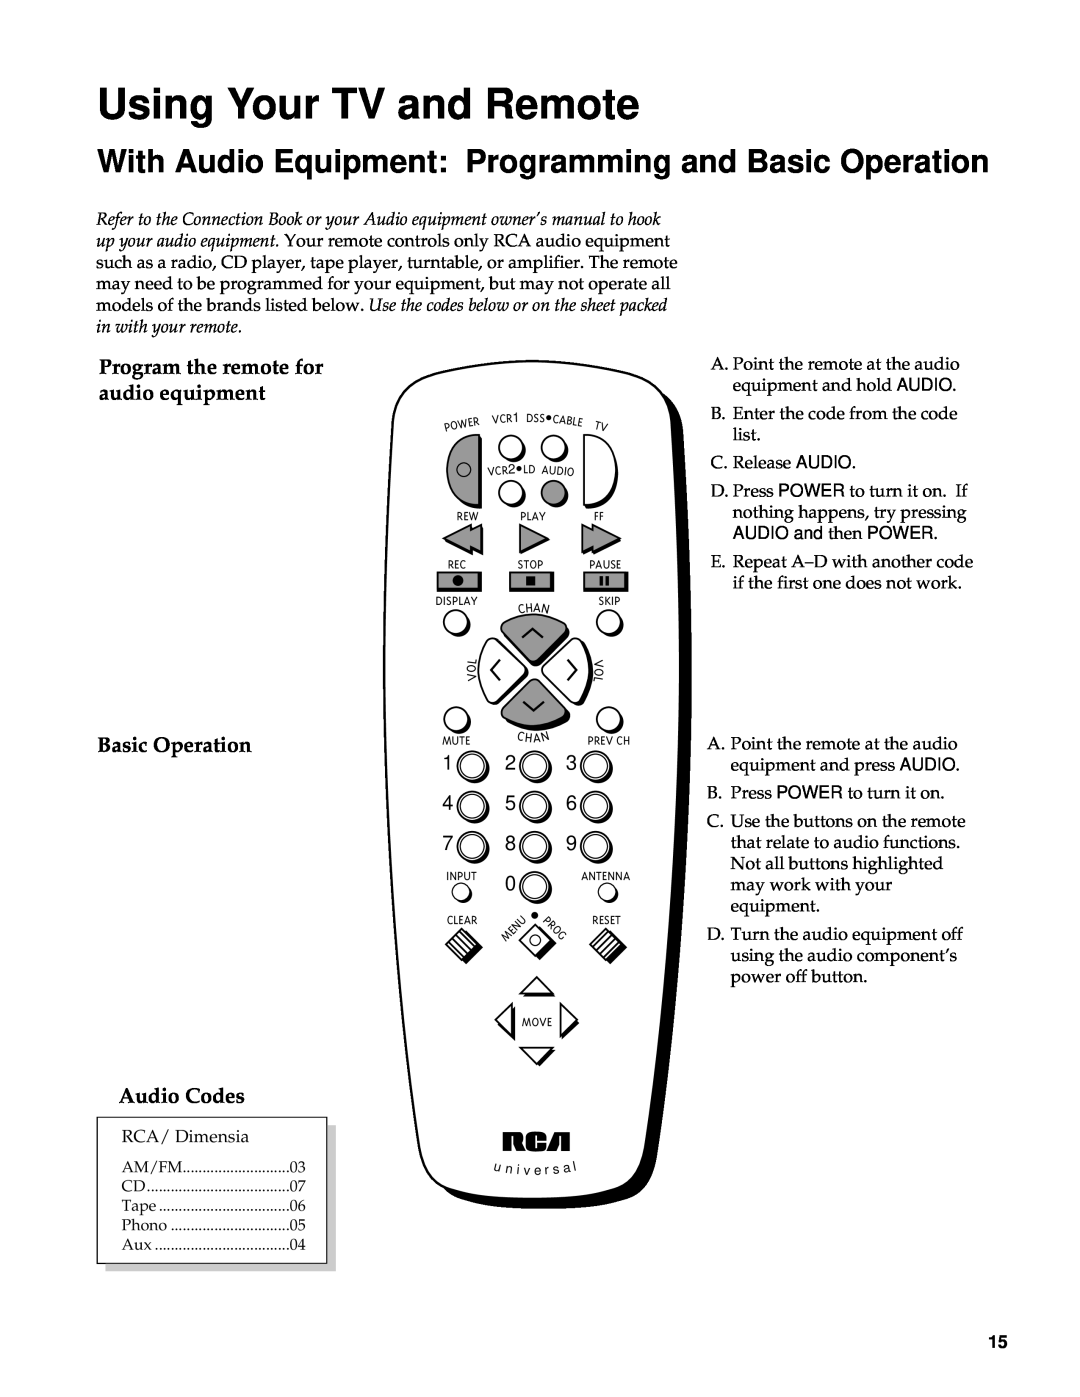 RCA Color TV With Audio Equipment Programming and Basic Operation, Program the remote for audio equipment, Audio Codes 